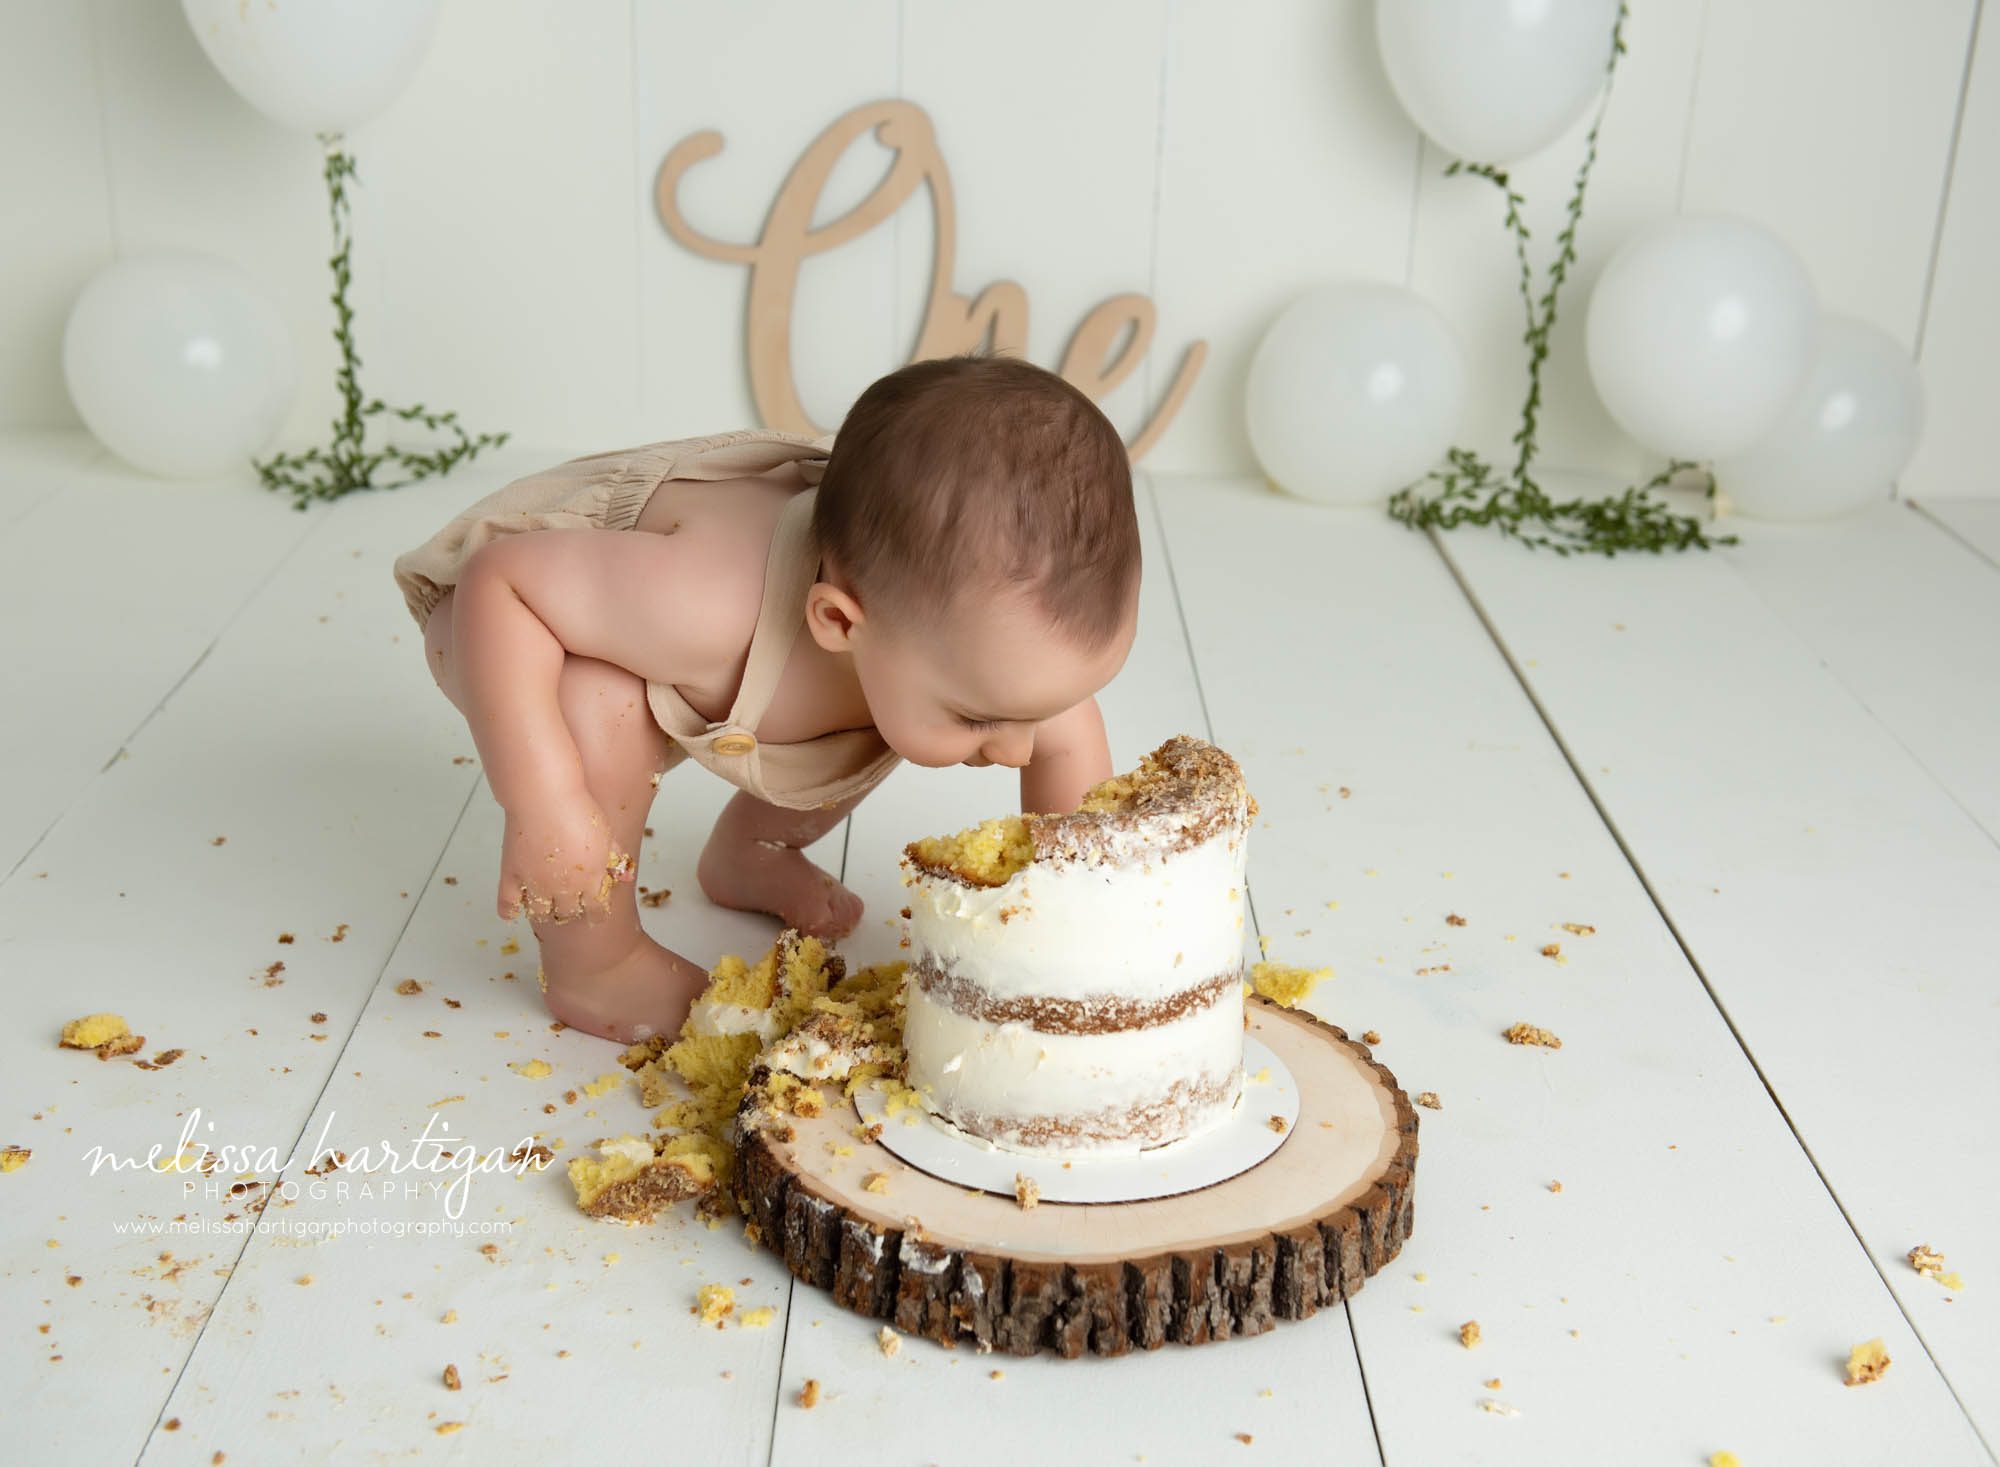 baby boy digging into cake for milestone photography cake smash session